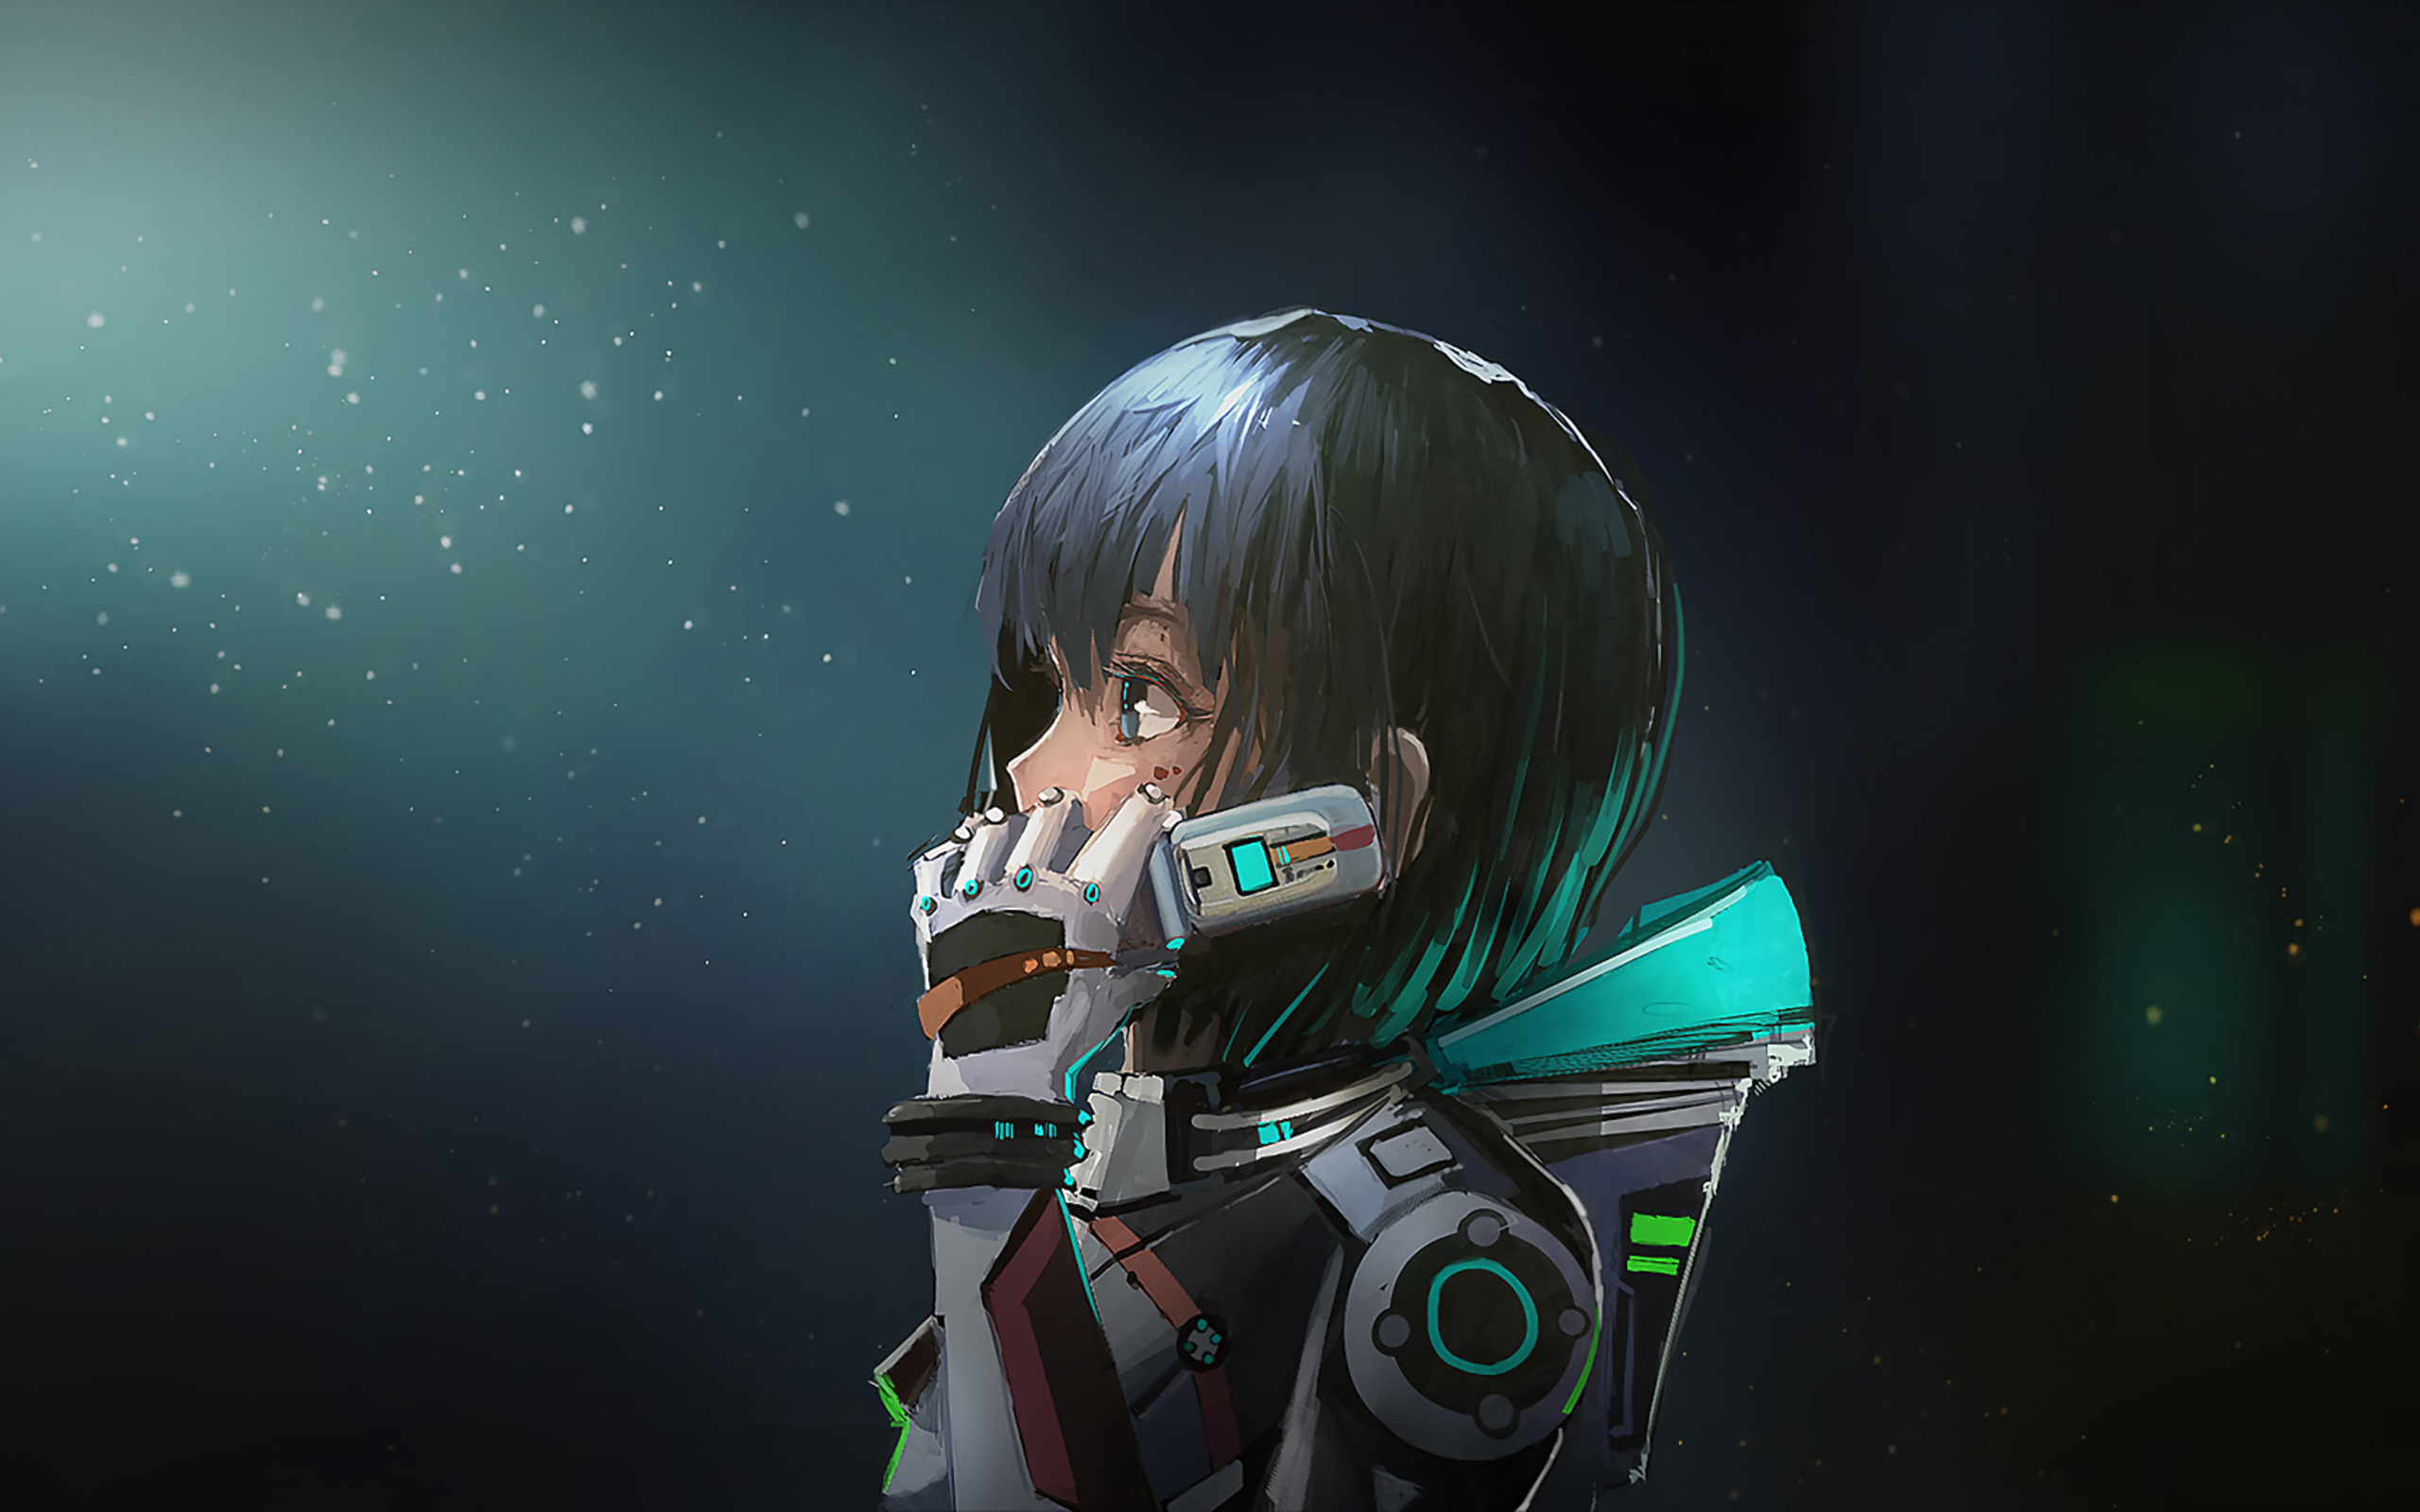 Anime Space Girl Wallpapers